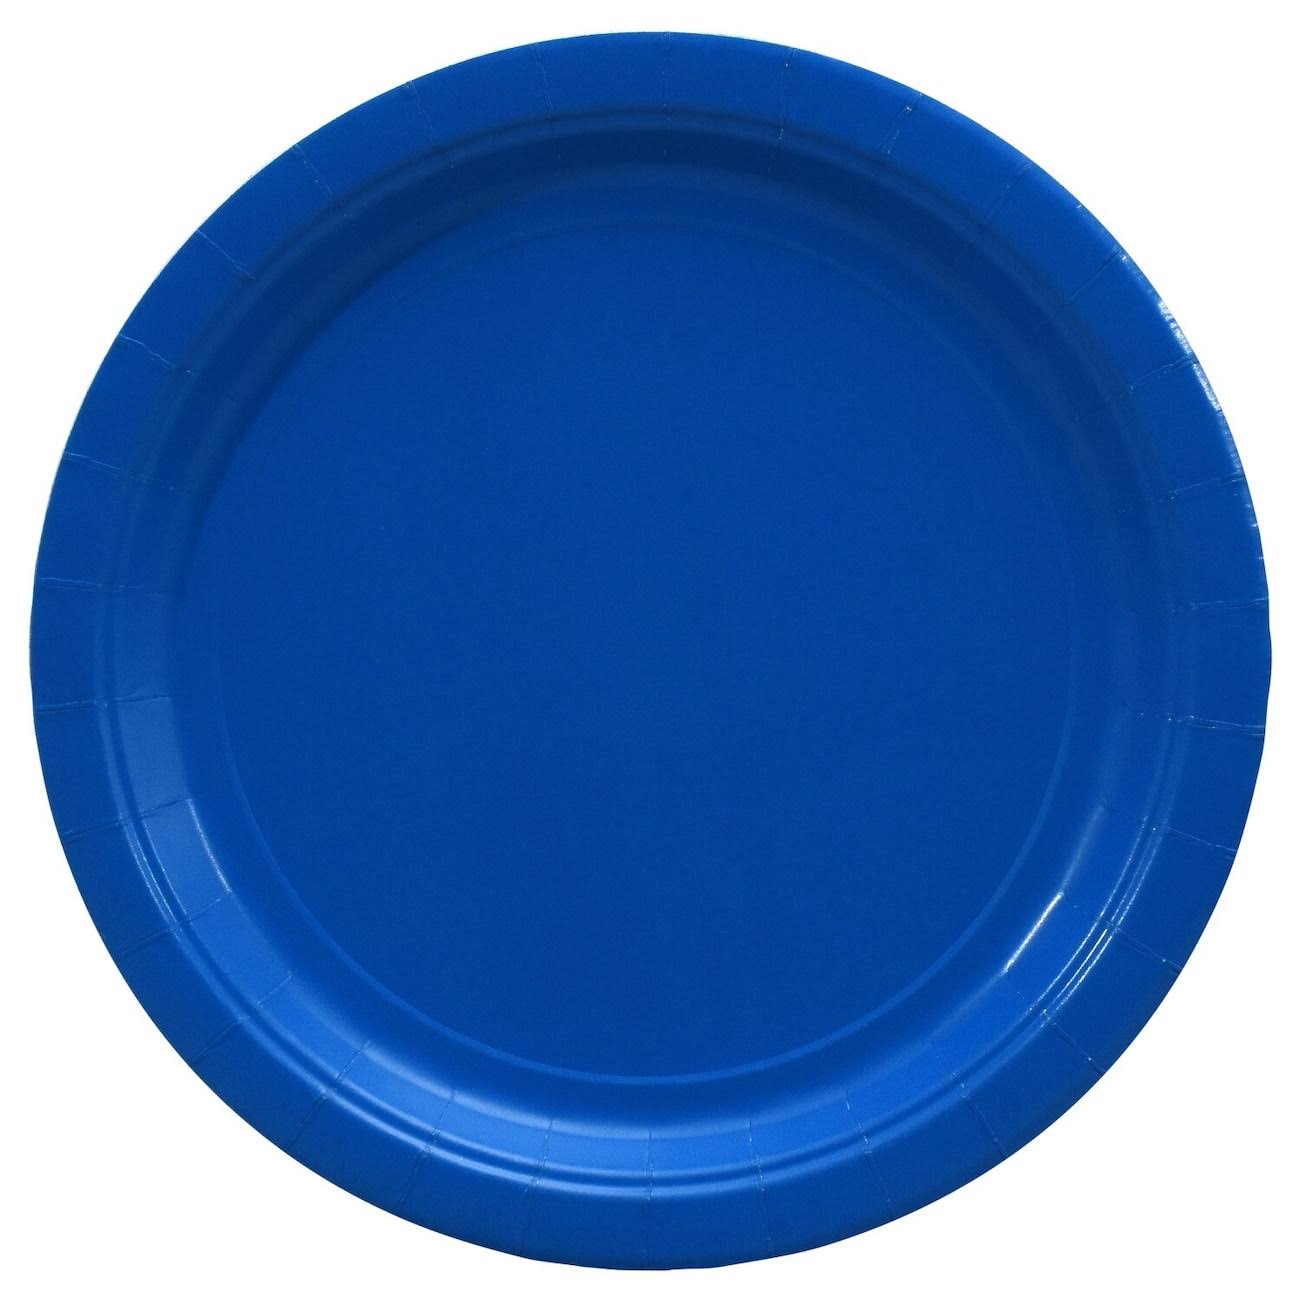 24 Blue Paper Party Plates, 9 Inches, 20-Ct. Packs at Dollar Tree